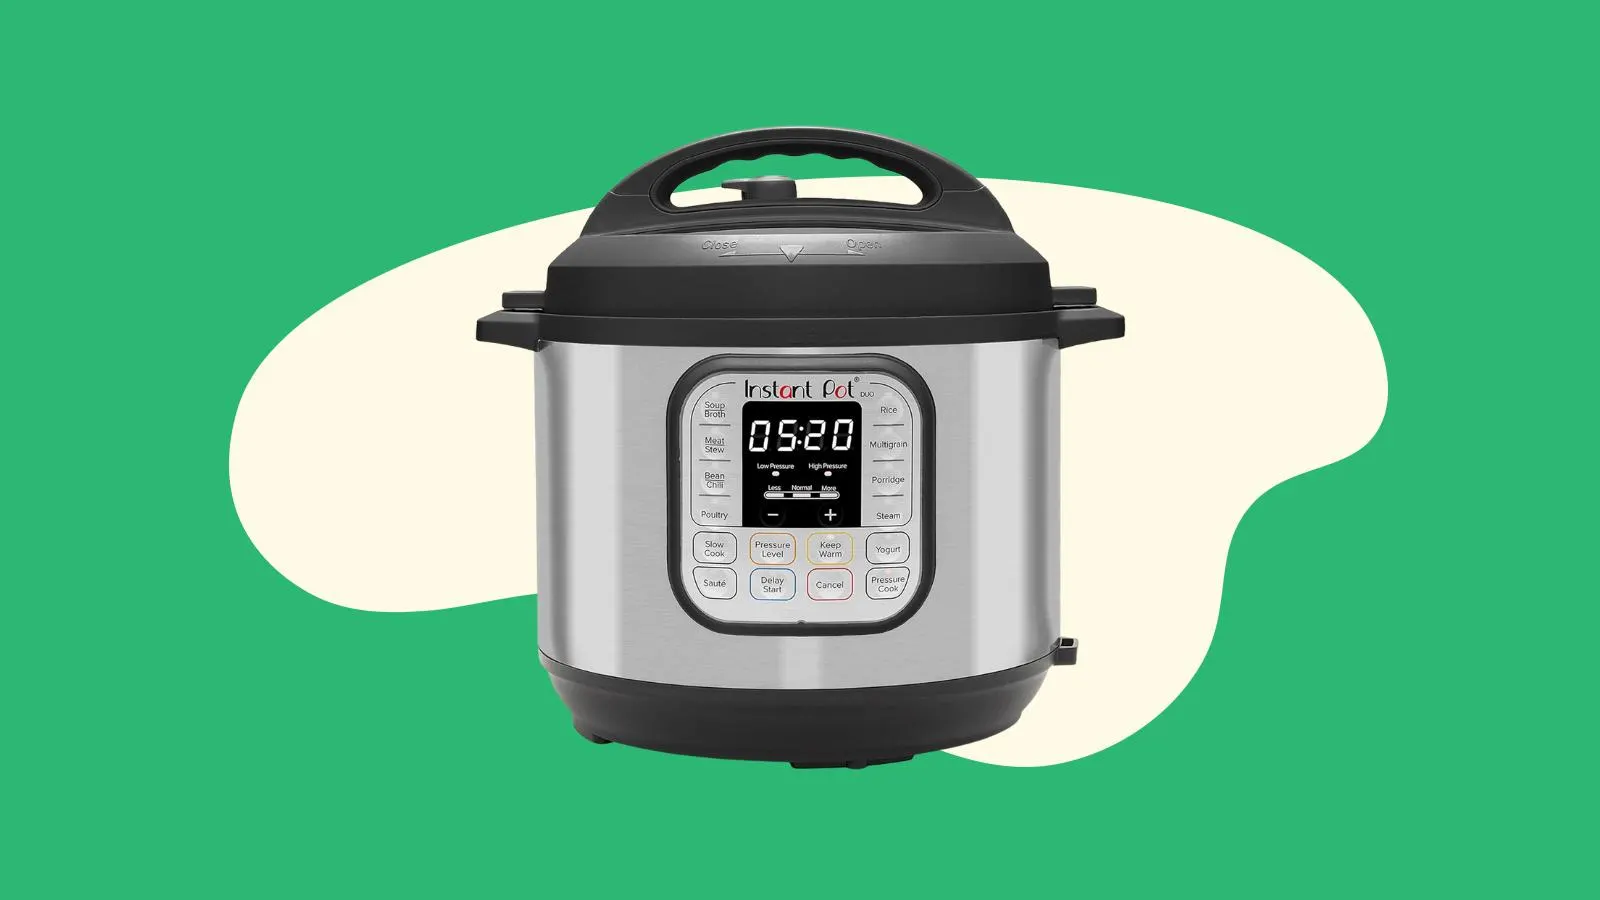 COMFEE' 6 Quart Pressure Cooker 12-in-1, One Touch Kick-Start